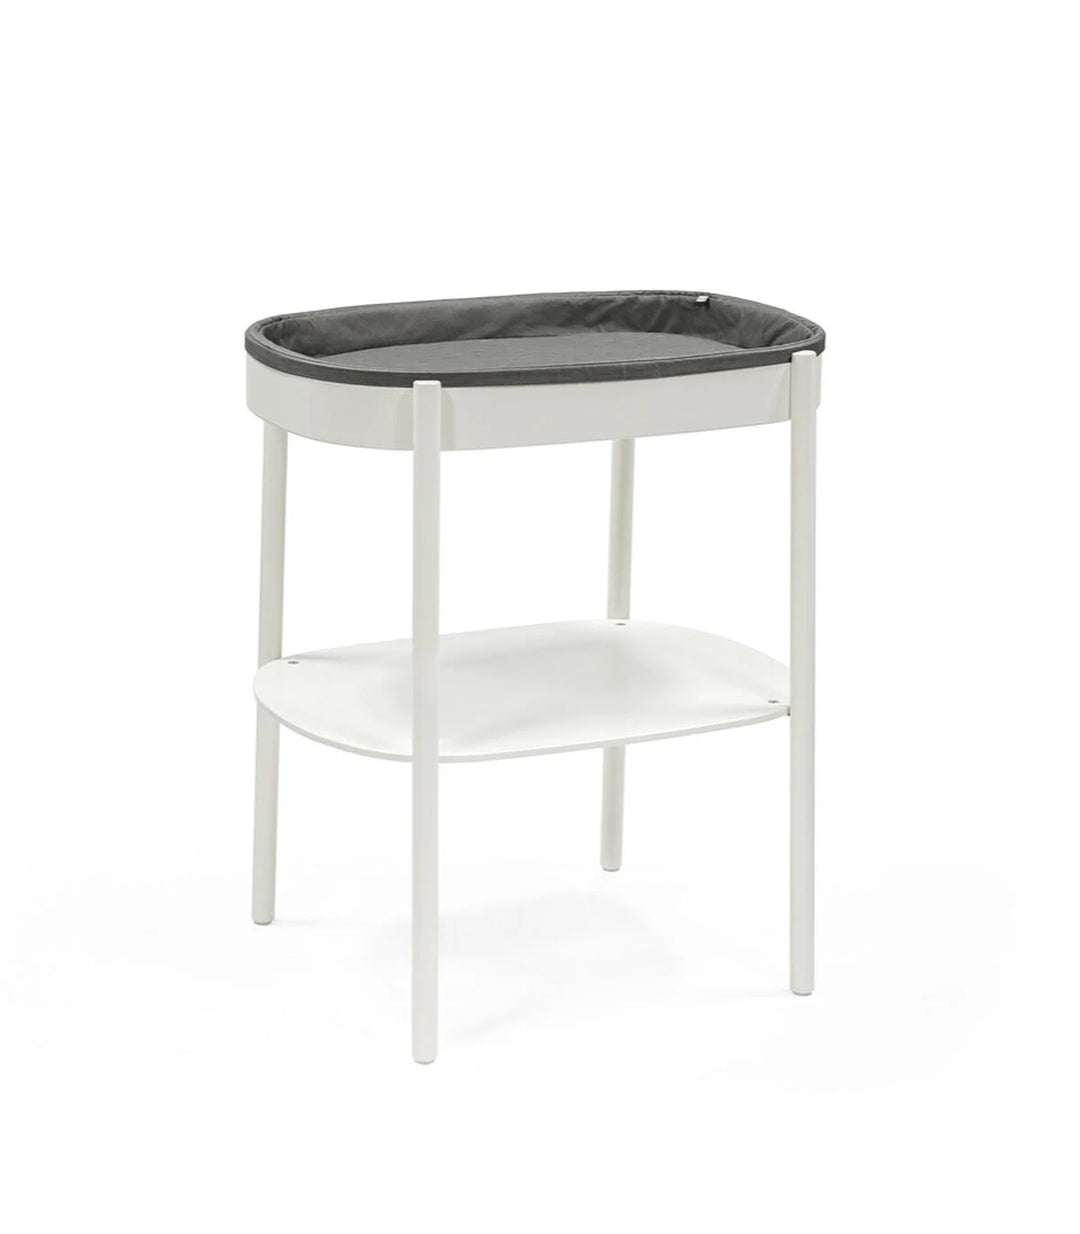 Sleepi Oval Changing Table by Stokke